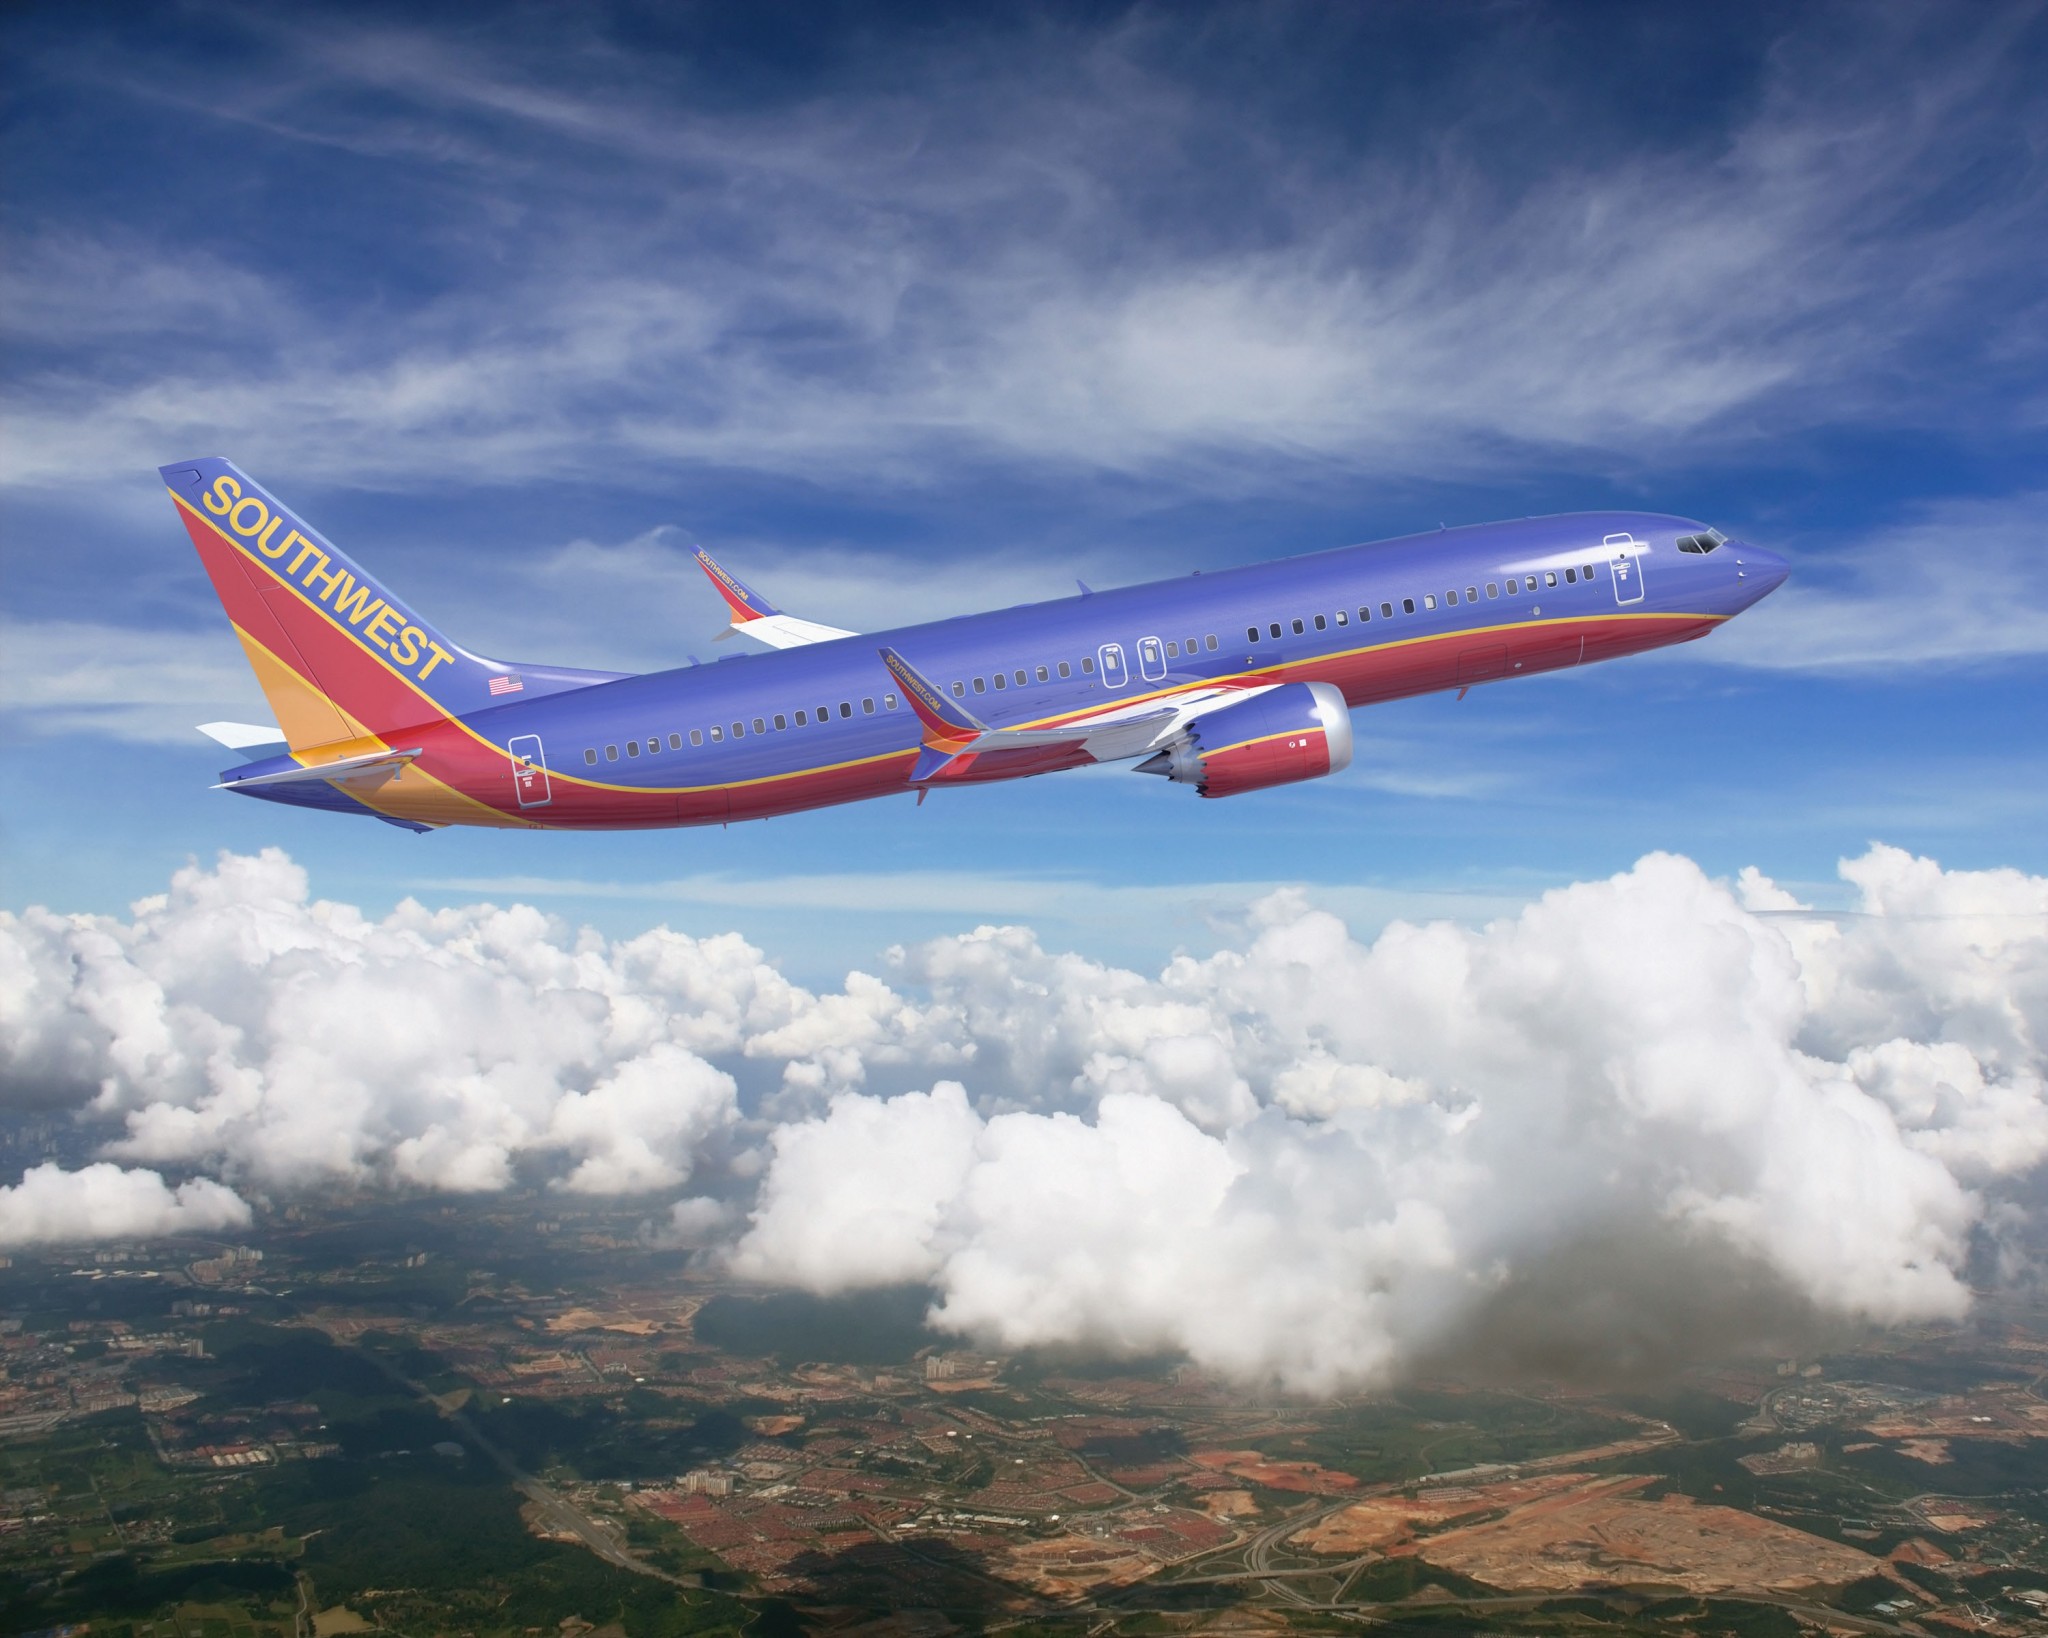 Southwest Airlines finishes strong Q3 with $13.7bn in cash